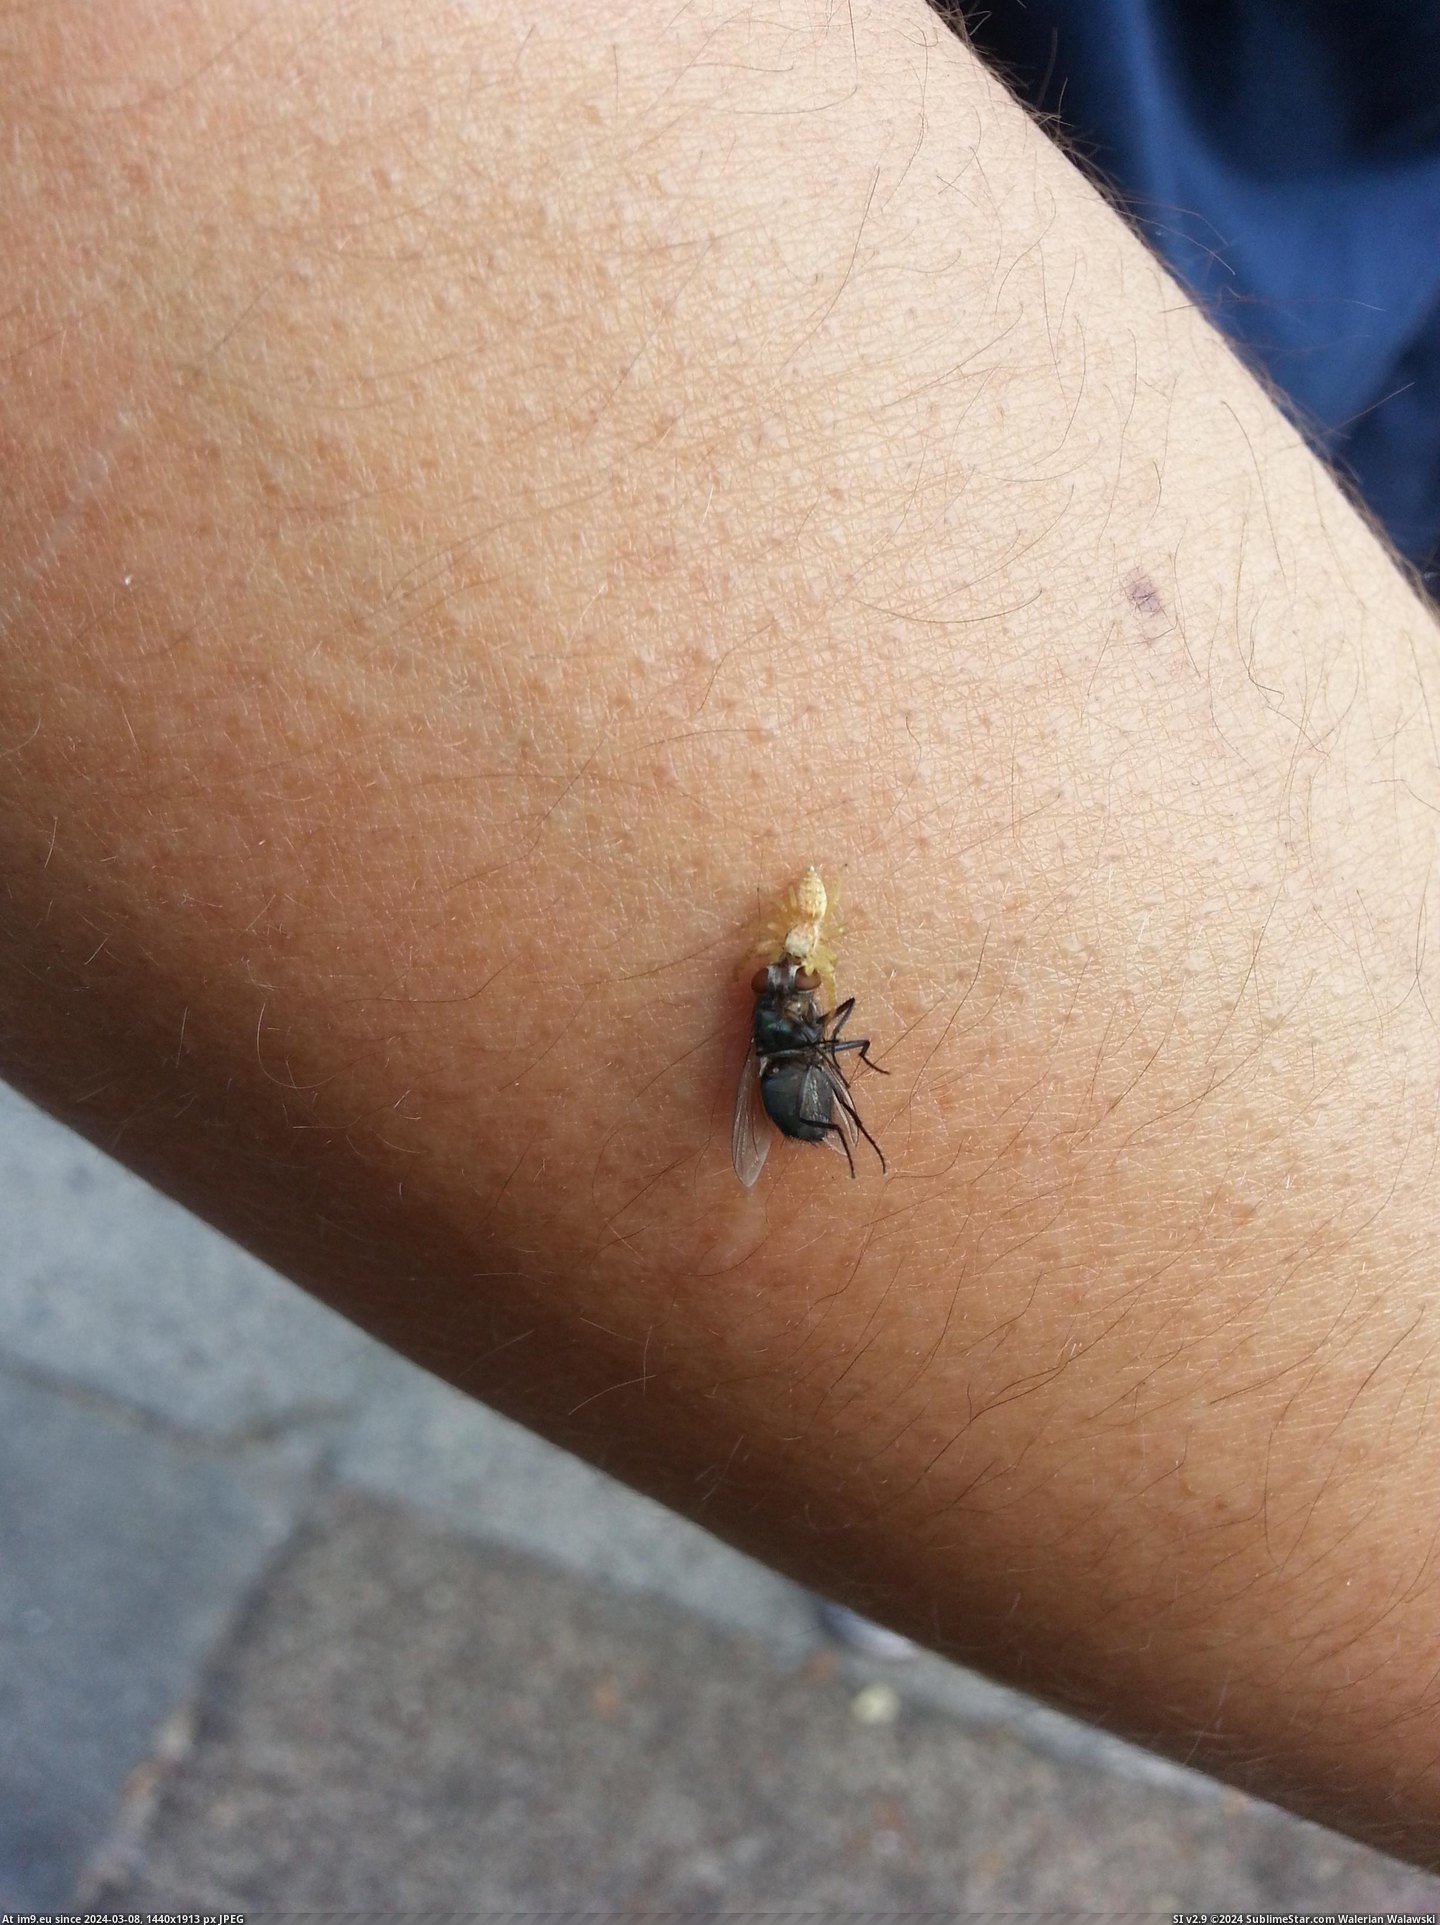 #Wtf #Arm #Landed #Killing #Spider #Fly [Wtf] This fly landed on my arm with a spider killing it Pic. (Image of album My r/WTF favs))